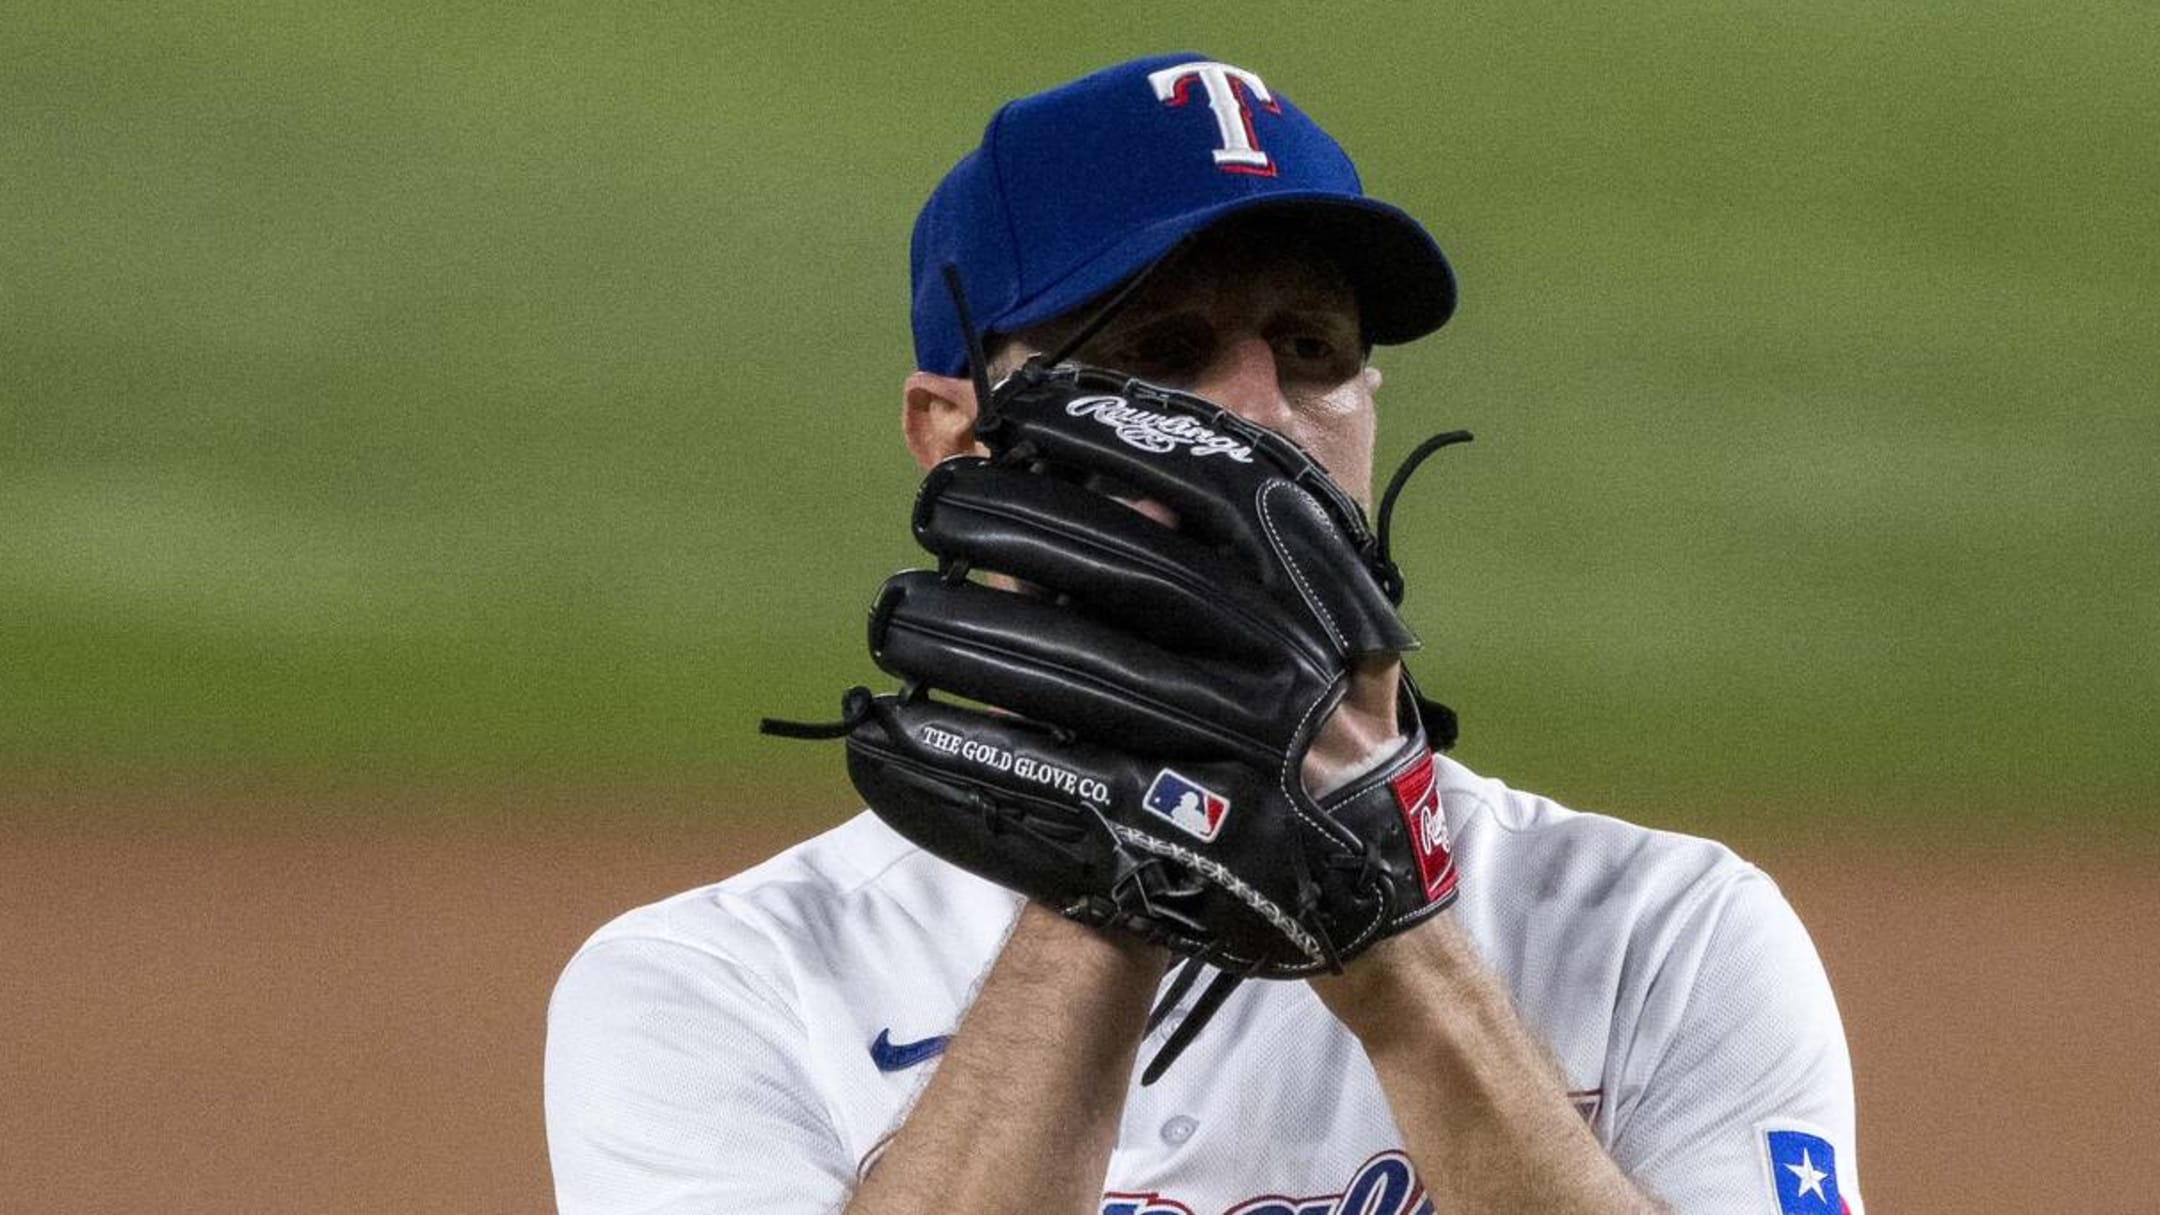 Max Scherzer says he's 'ready to go' for Rangers in ALCS, Sports